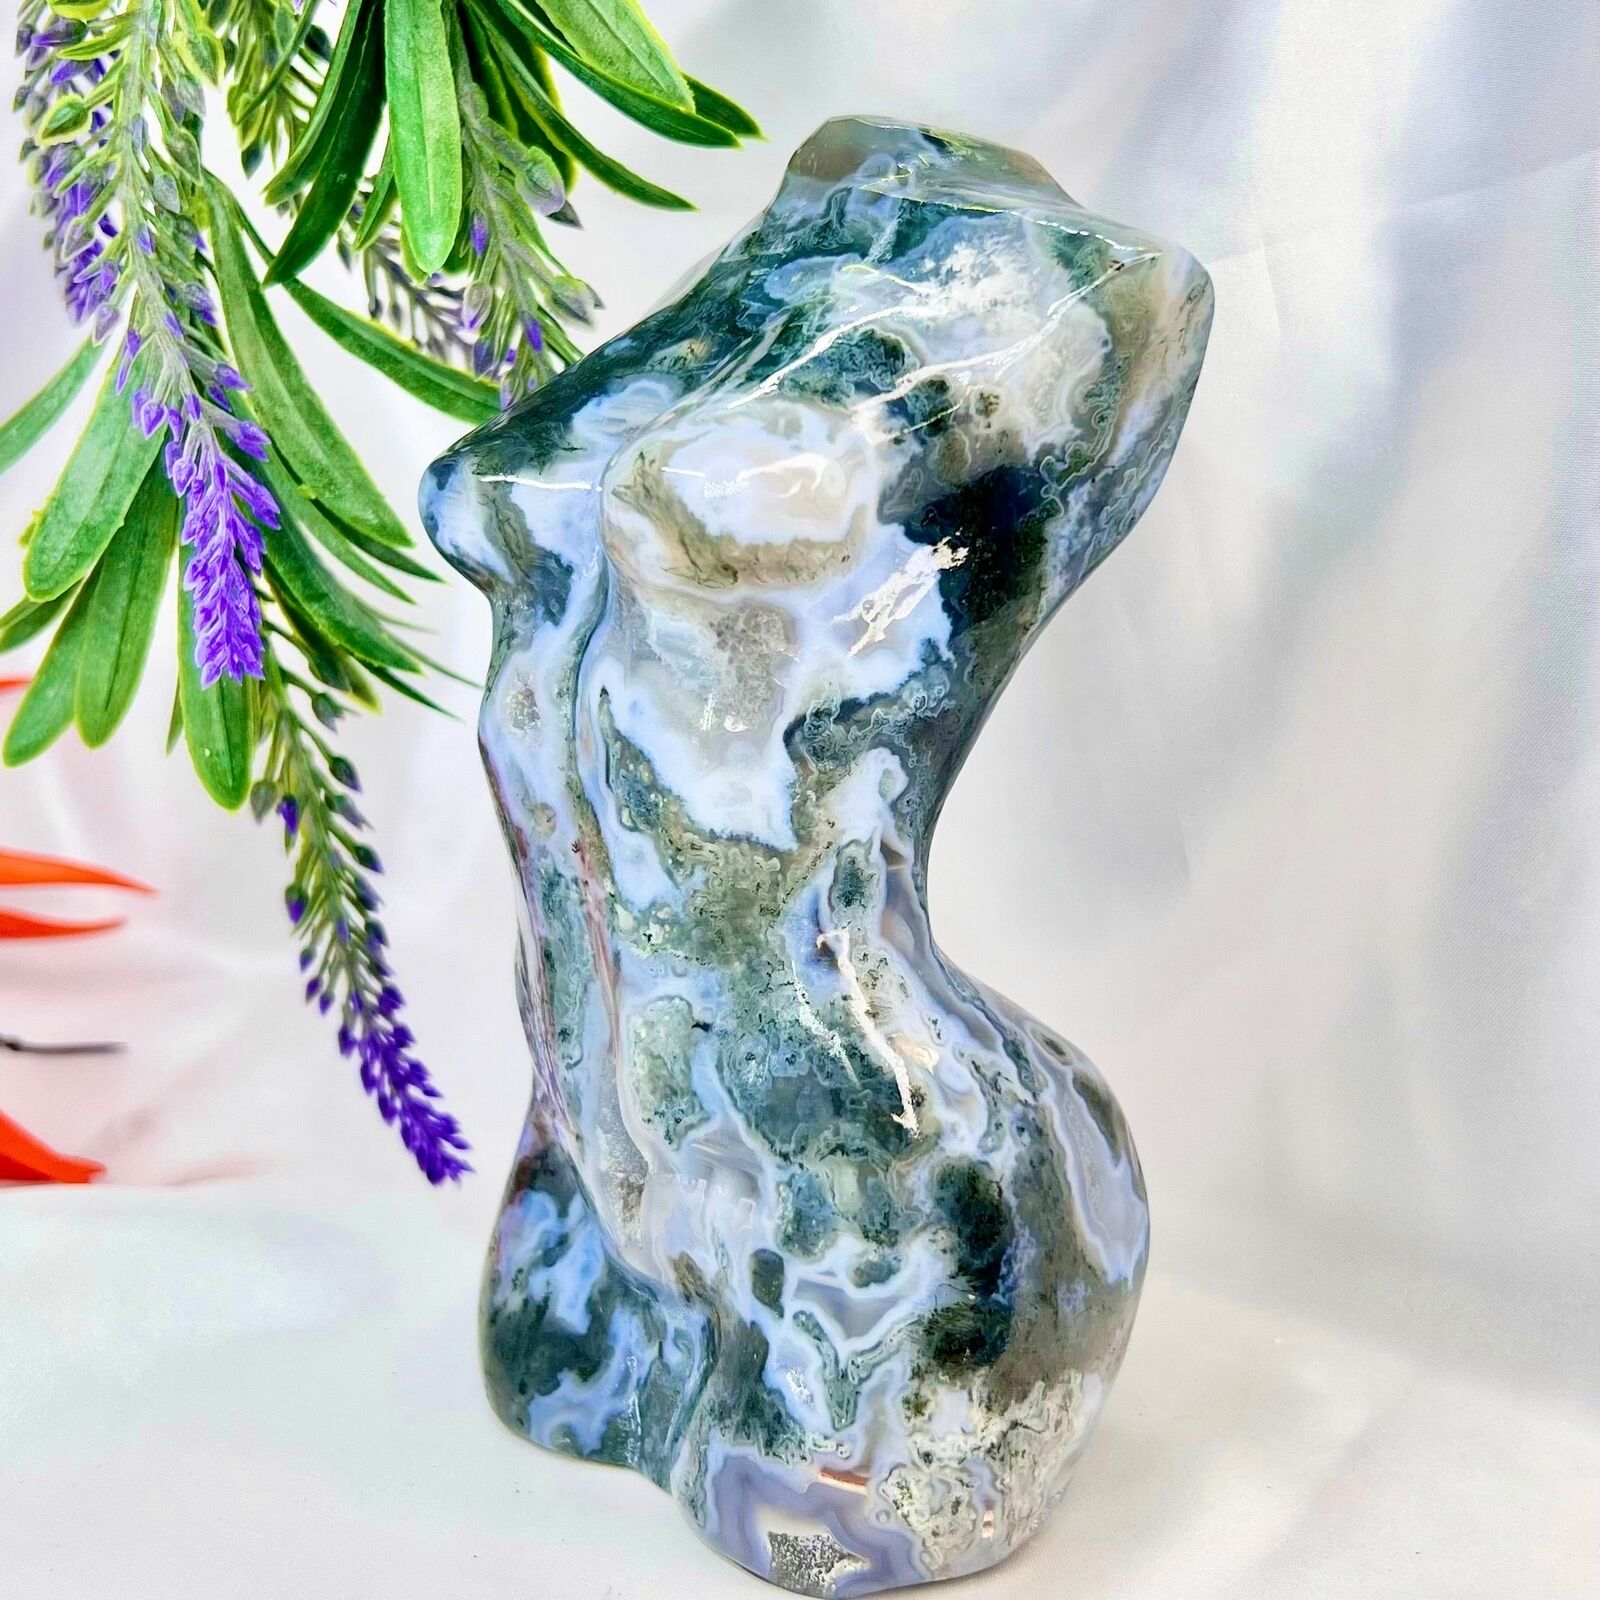 Moss Agate Lady Body Female Crystal Carving 1421g 166mm